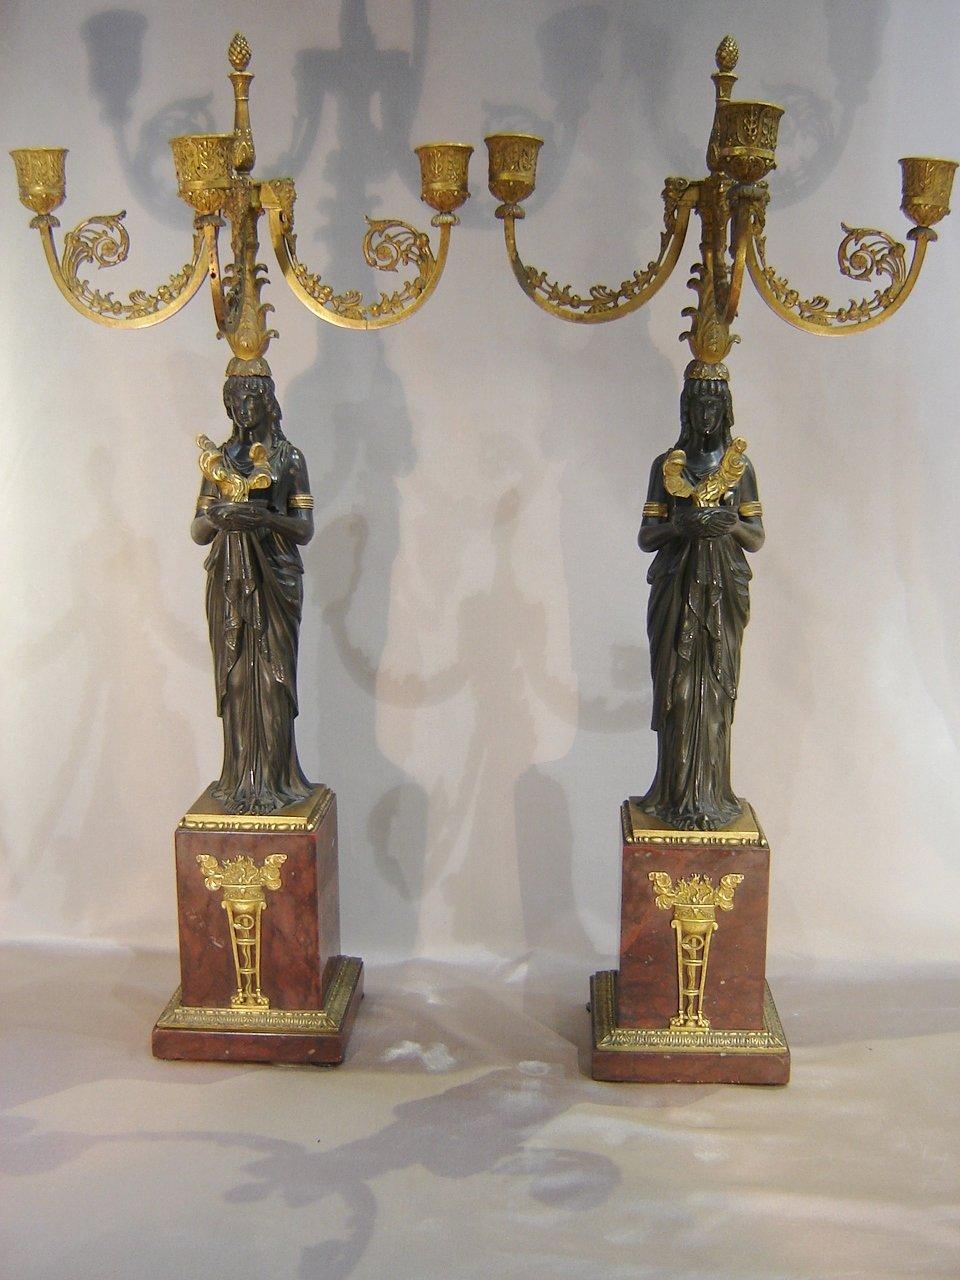 Exceptional pair of patinated bronze and gilded bronze candelabra, dating from the early nineteenth century, Empire period, attributed to Pierre-Philippe Thomire (1751-1843), representing a vestal draped in the antique, holding in his hands a cup of